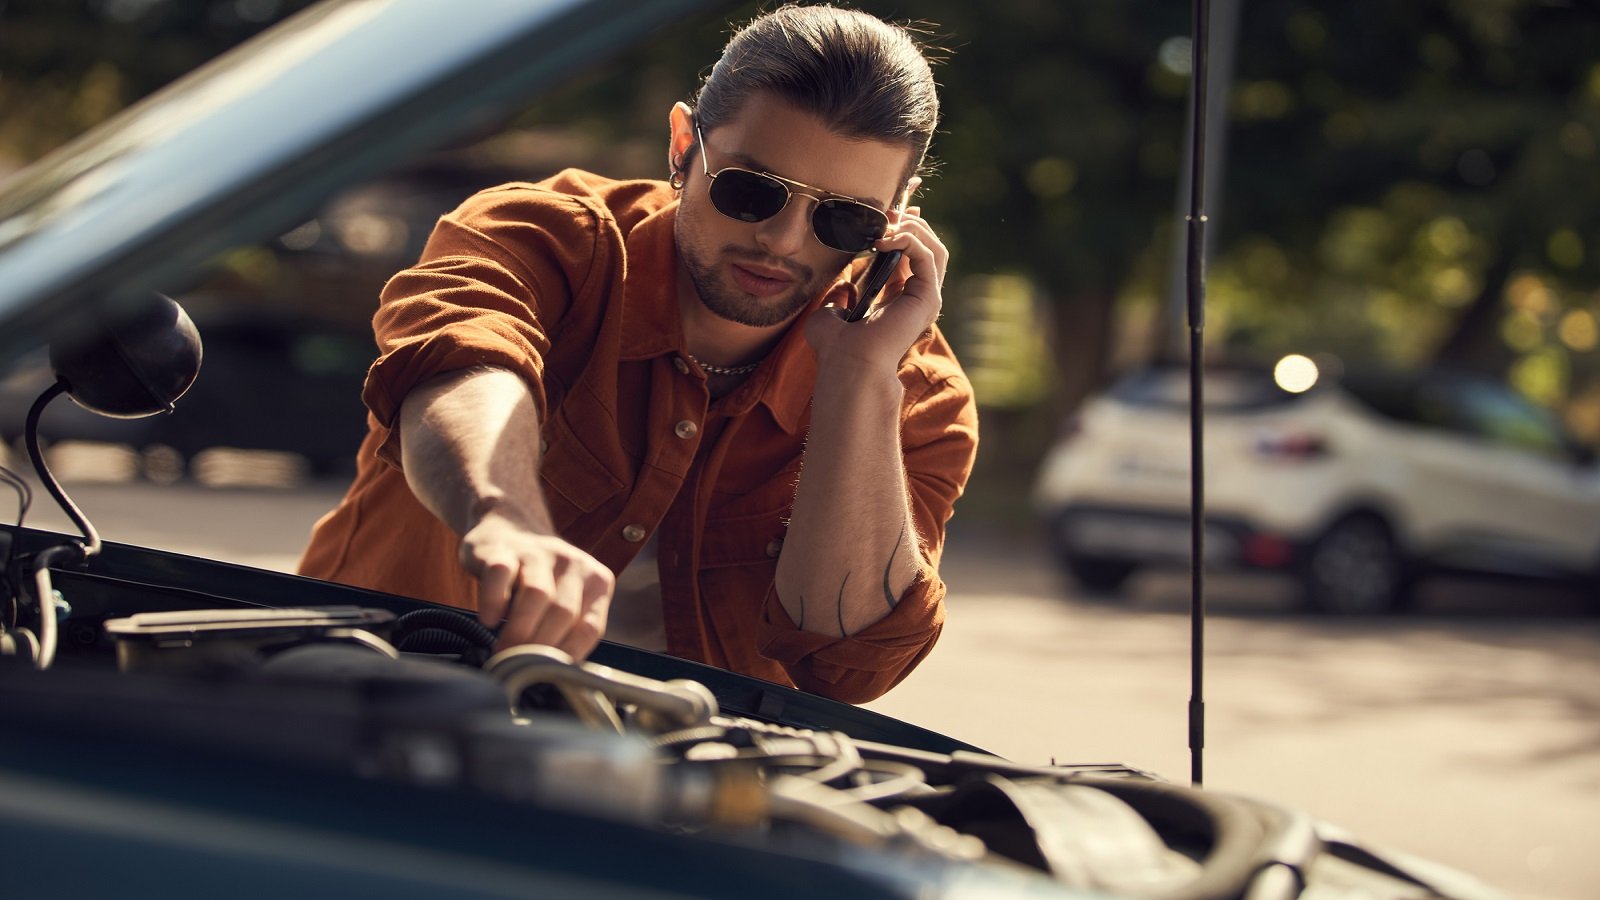 <p>Drivers often look for reliability and longevity when purchasing a car. They want a vehicle that can go the distance without facing serious issues, especially before reaching the 100,000-mile mark.</p> <p>Unfortunately, not all cars are built to last this long without problems. In this article, we will provide a list of 25 cars notorious for breaking down before 100k miles, helping potential buyers make more informed decisions.</p>